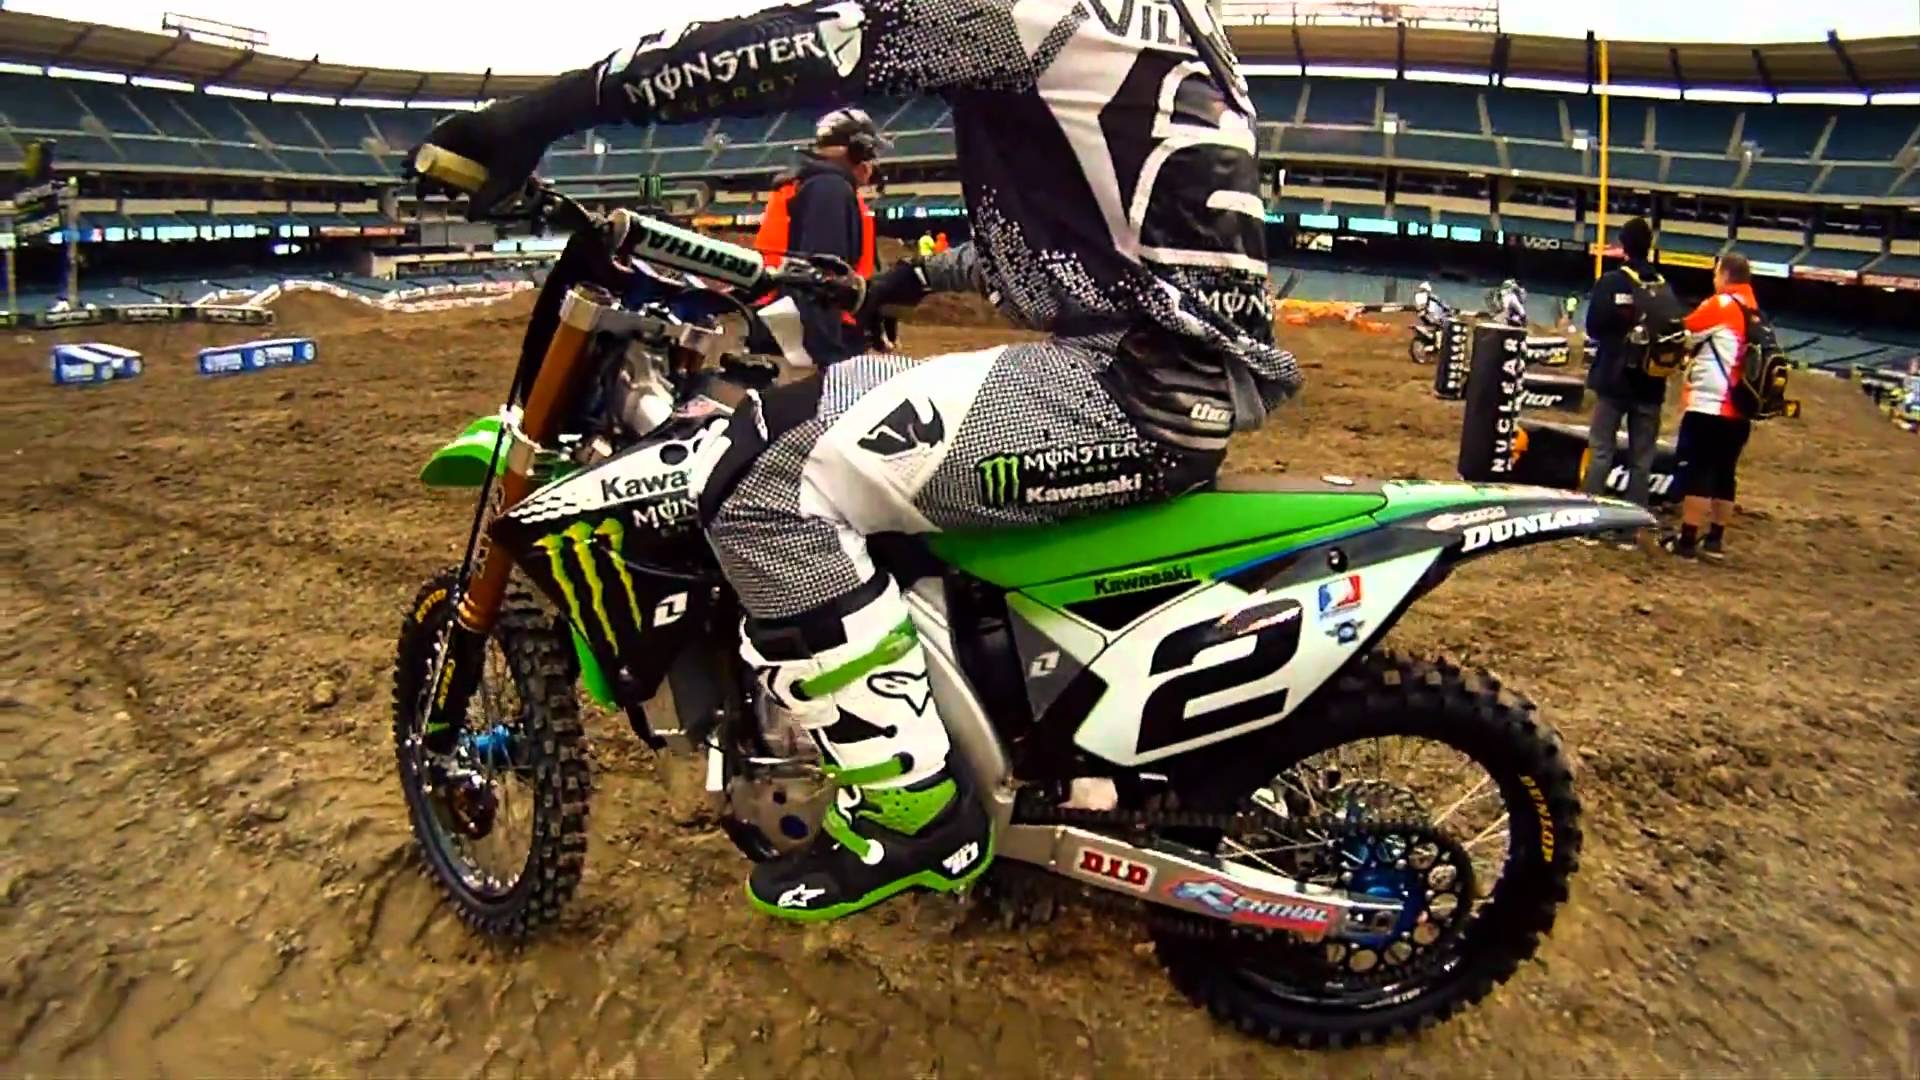 GoPro HD: Monster Energy Supercross 2011 Opening Day at Anaheim